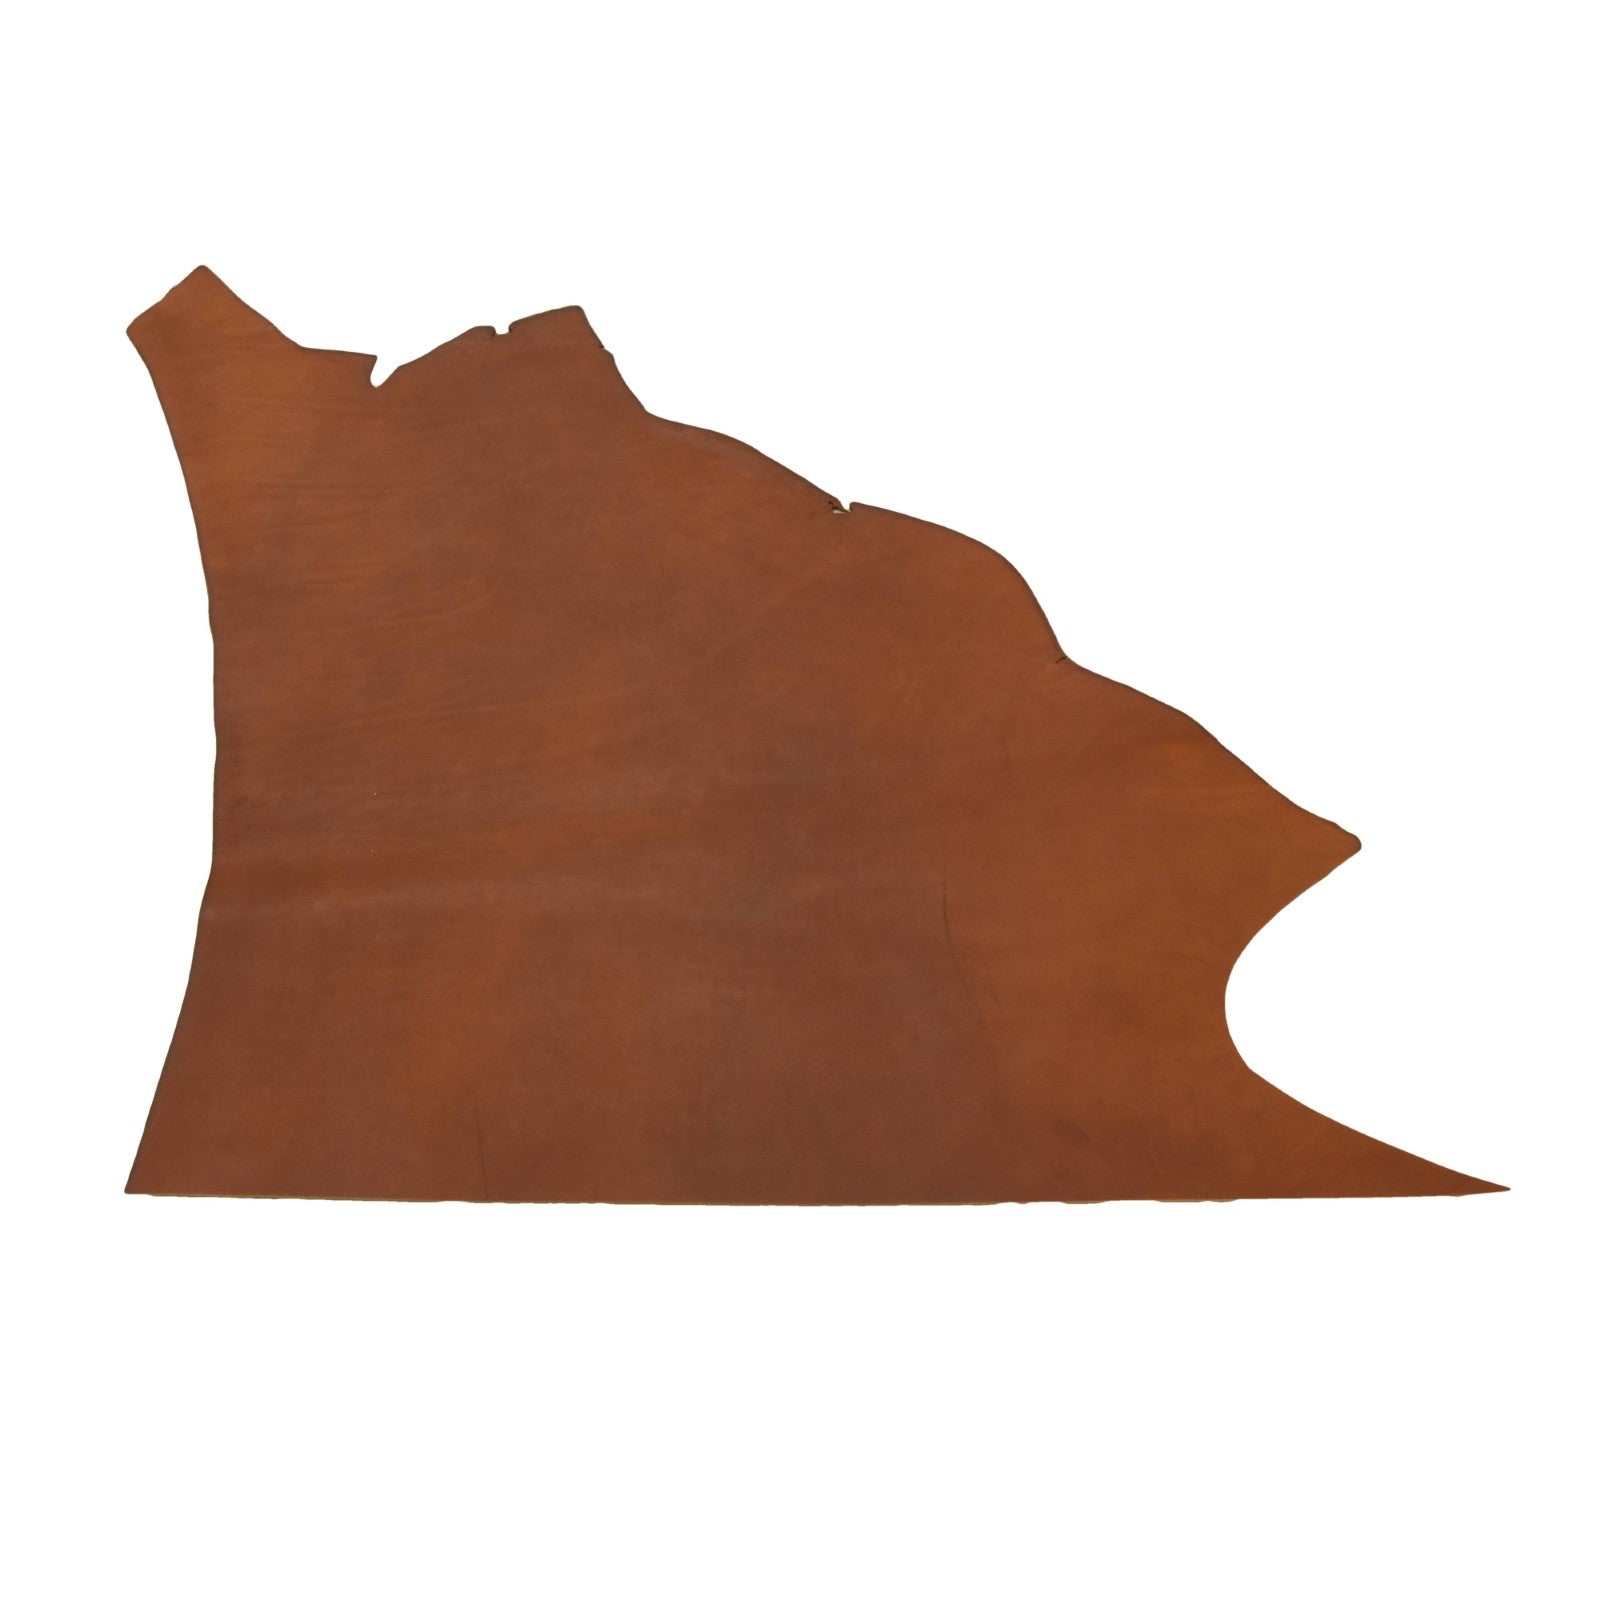 Rustic Russet Red Foothills, Oil Tanned Hides, Summits Edge, Top Piece / 6.5 - 7.5 Sq Ft | The Leather Guy